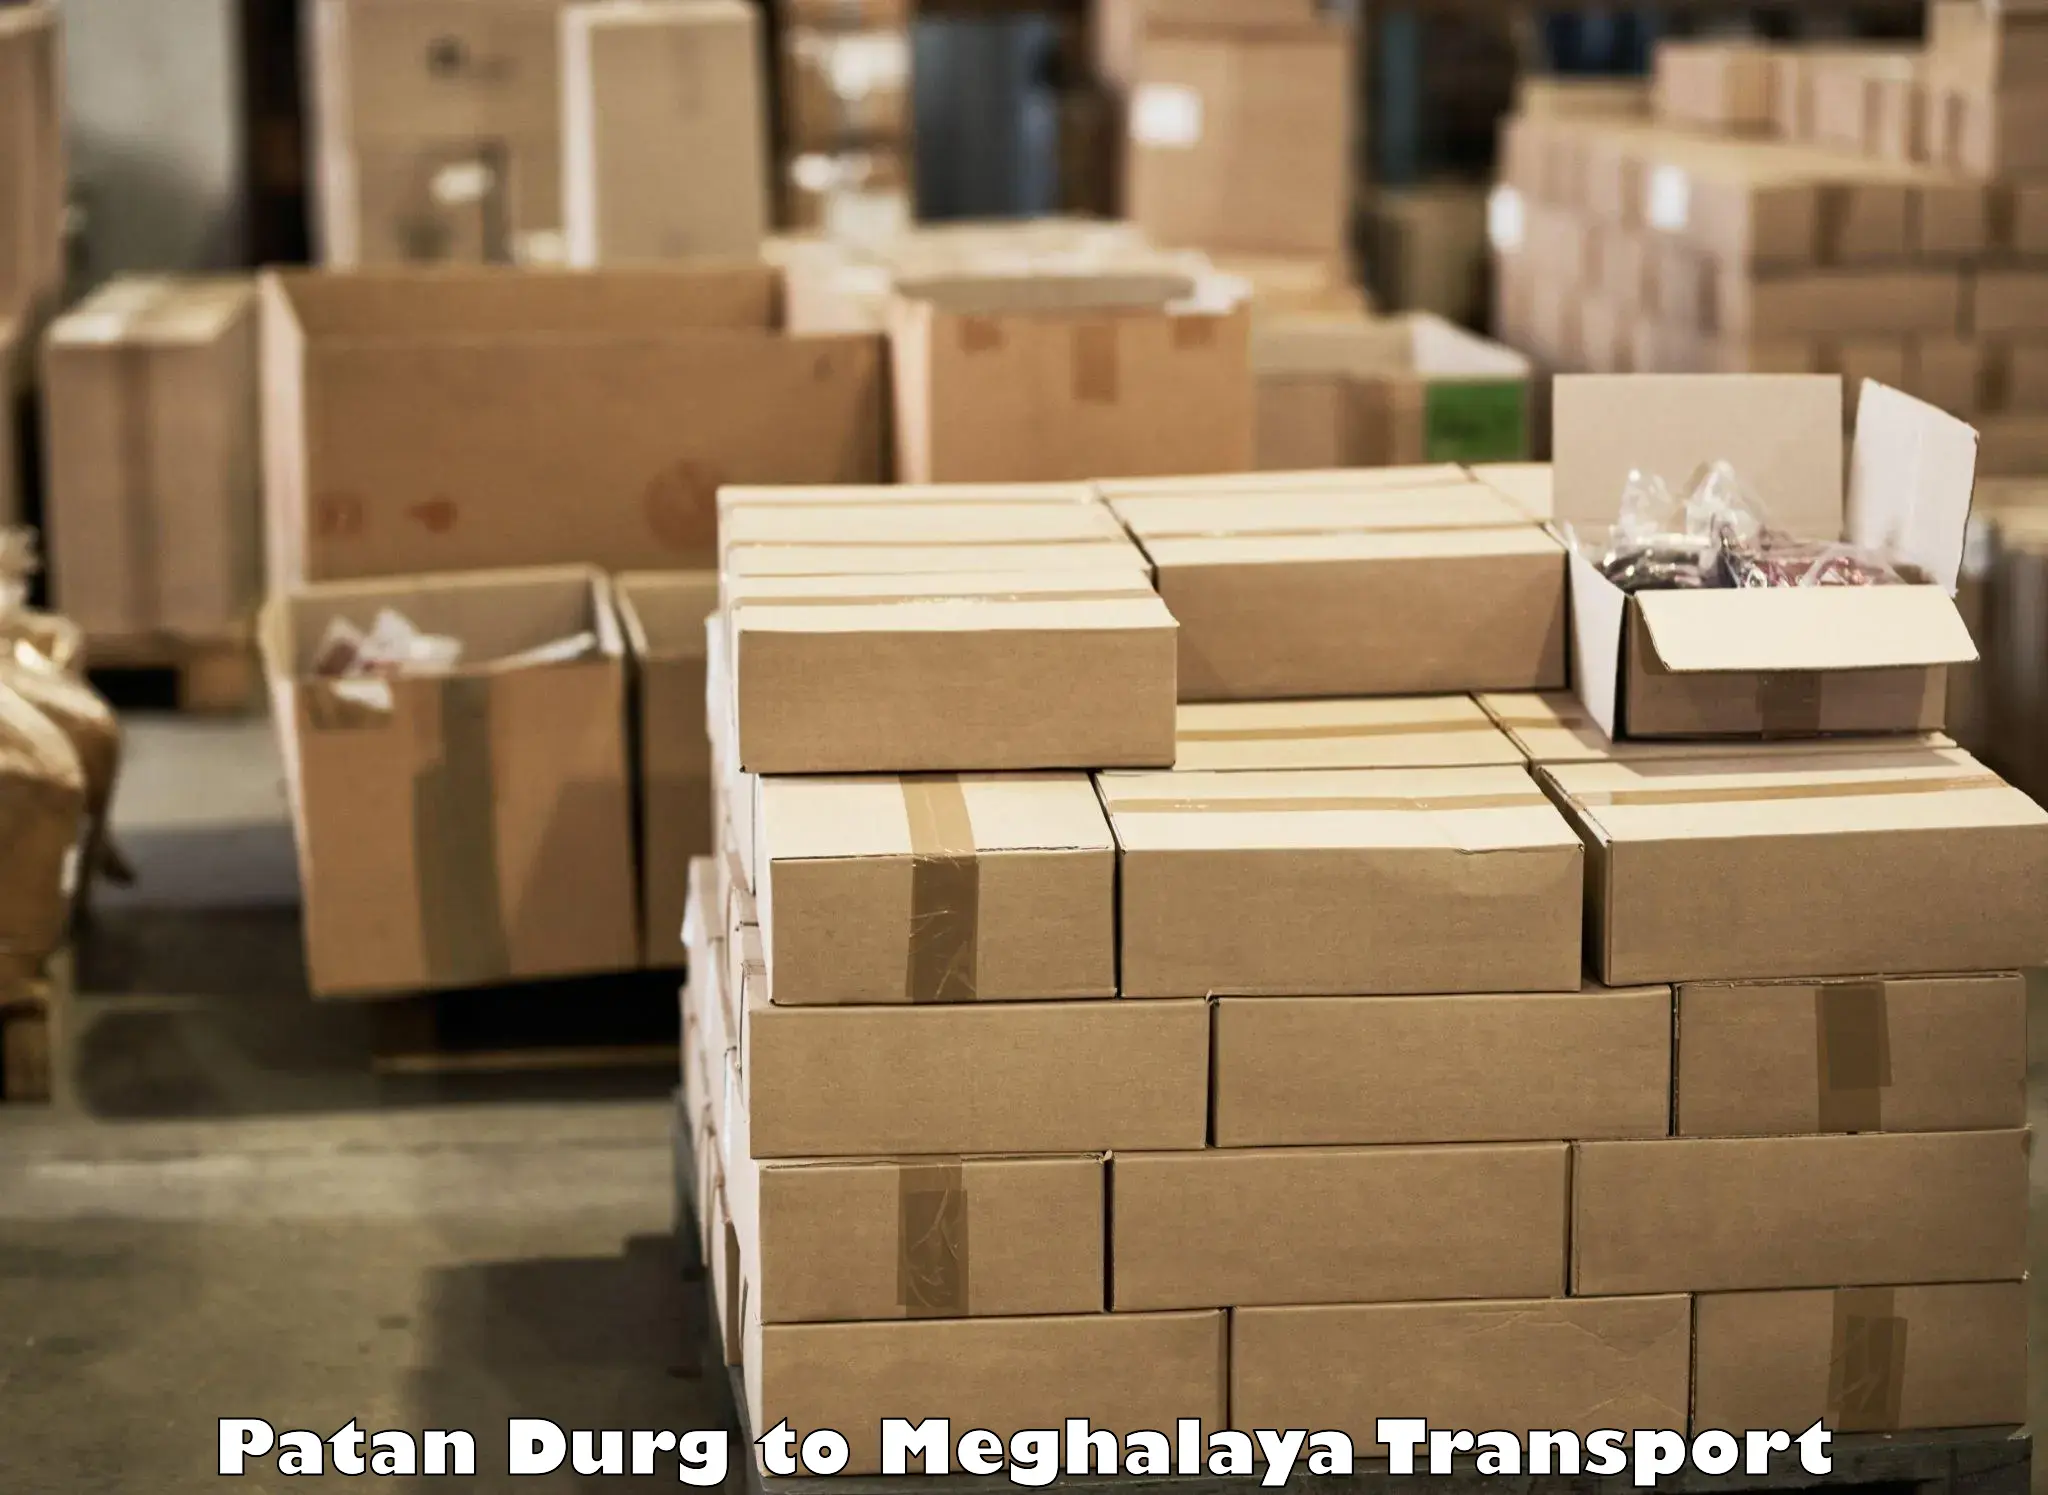 Truck transport companies in India Patan Durg to Shillong